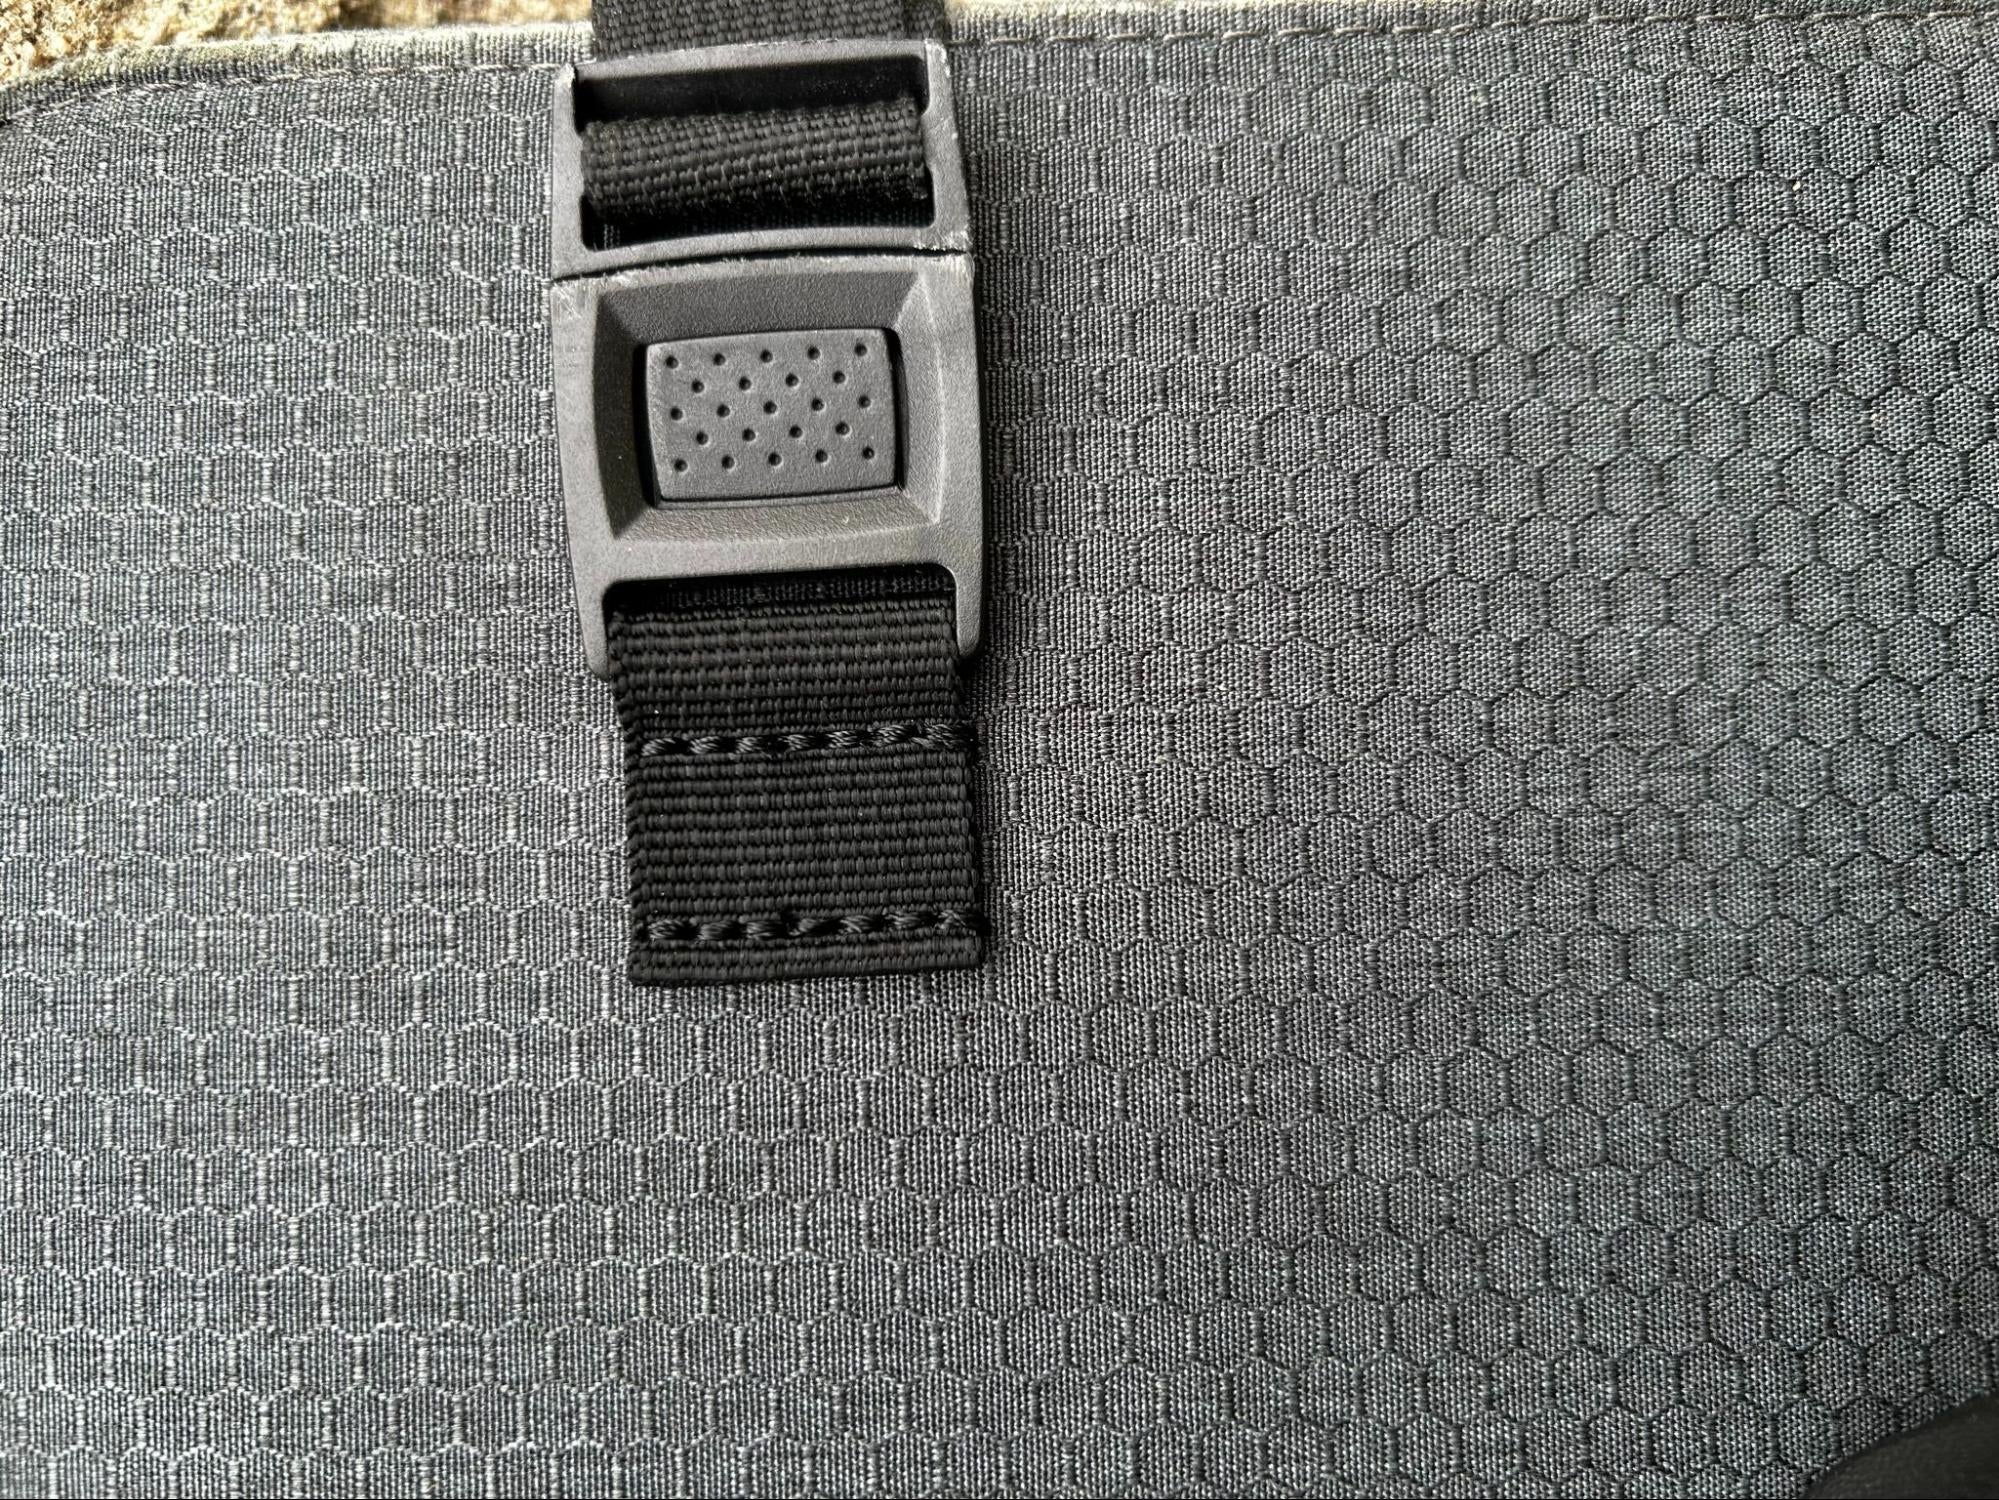 buckles on either side of the solar panel